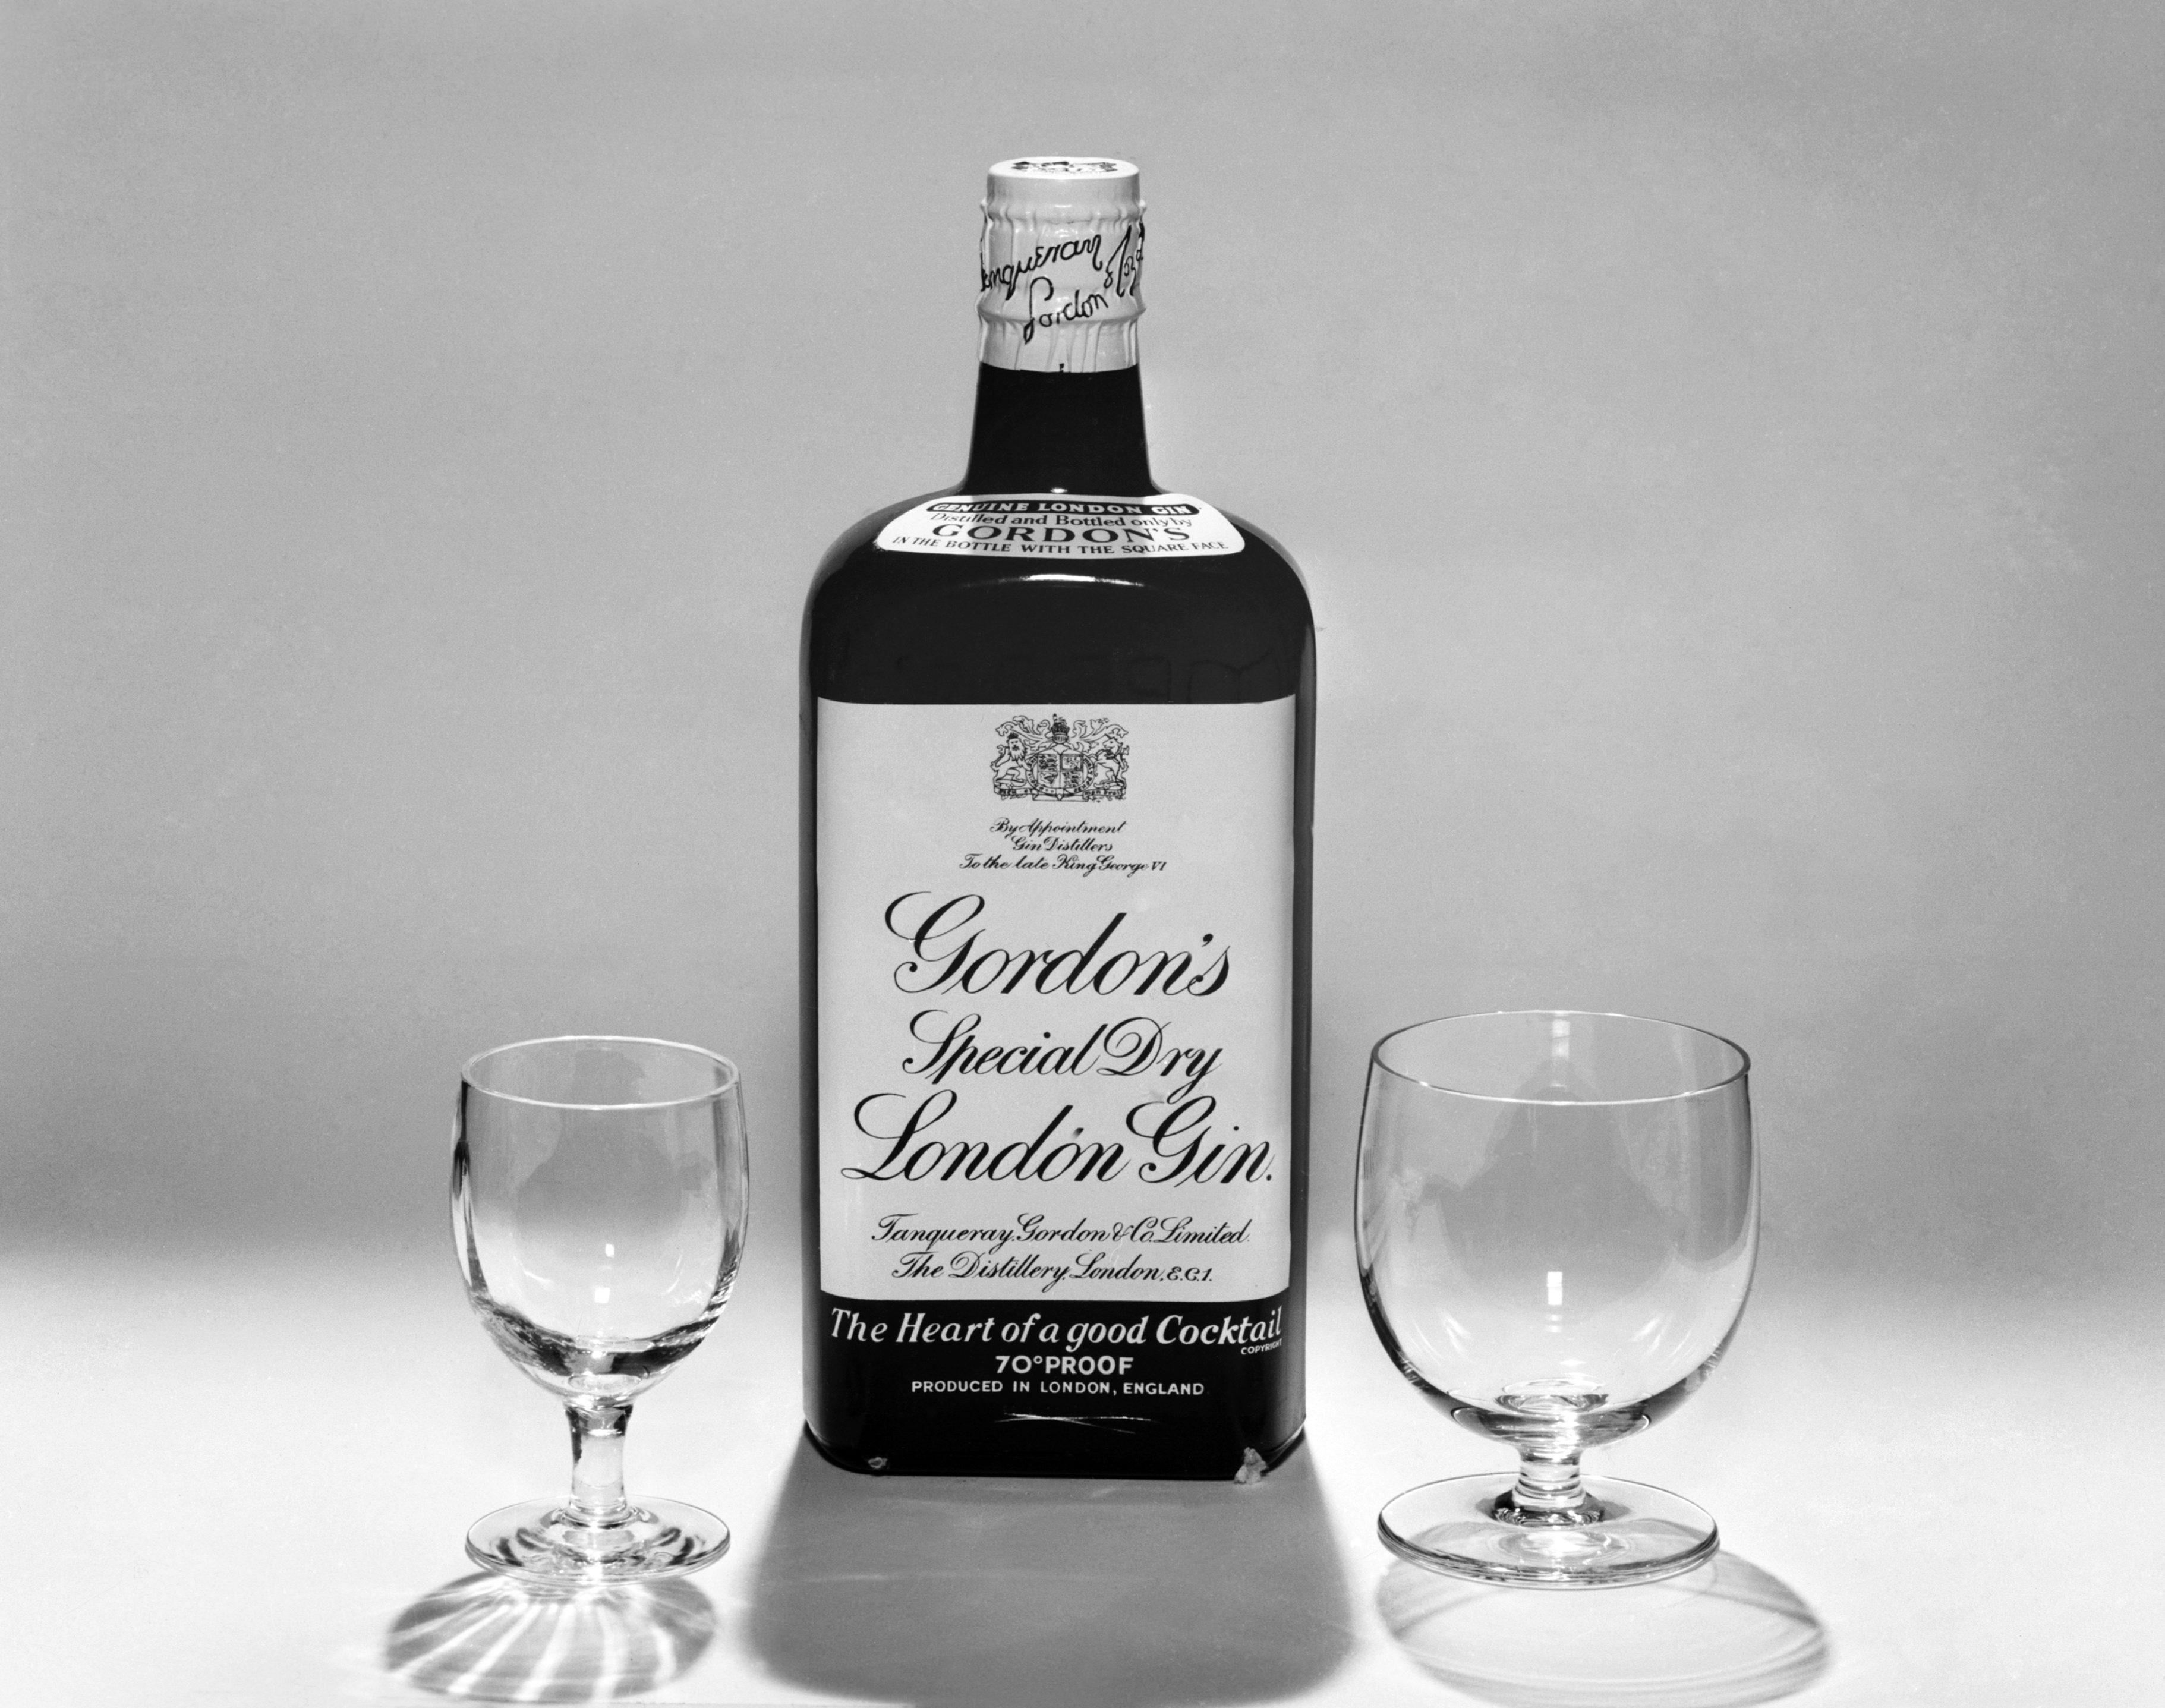 A 1959 bottle of Gordon’s London Gin. Photo: Getty Images